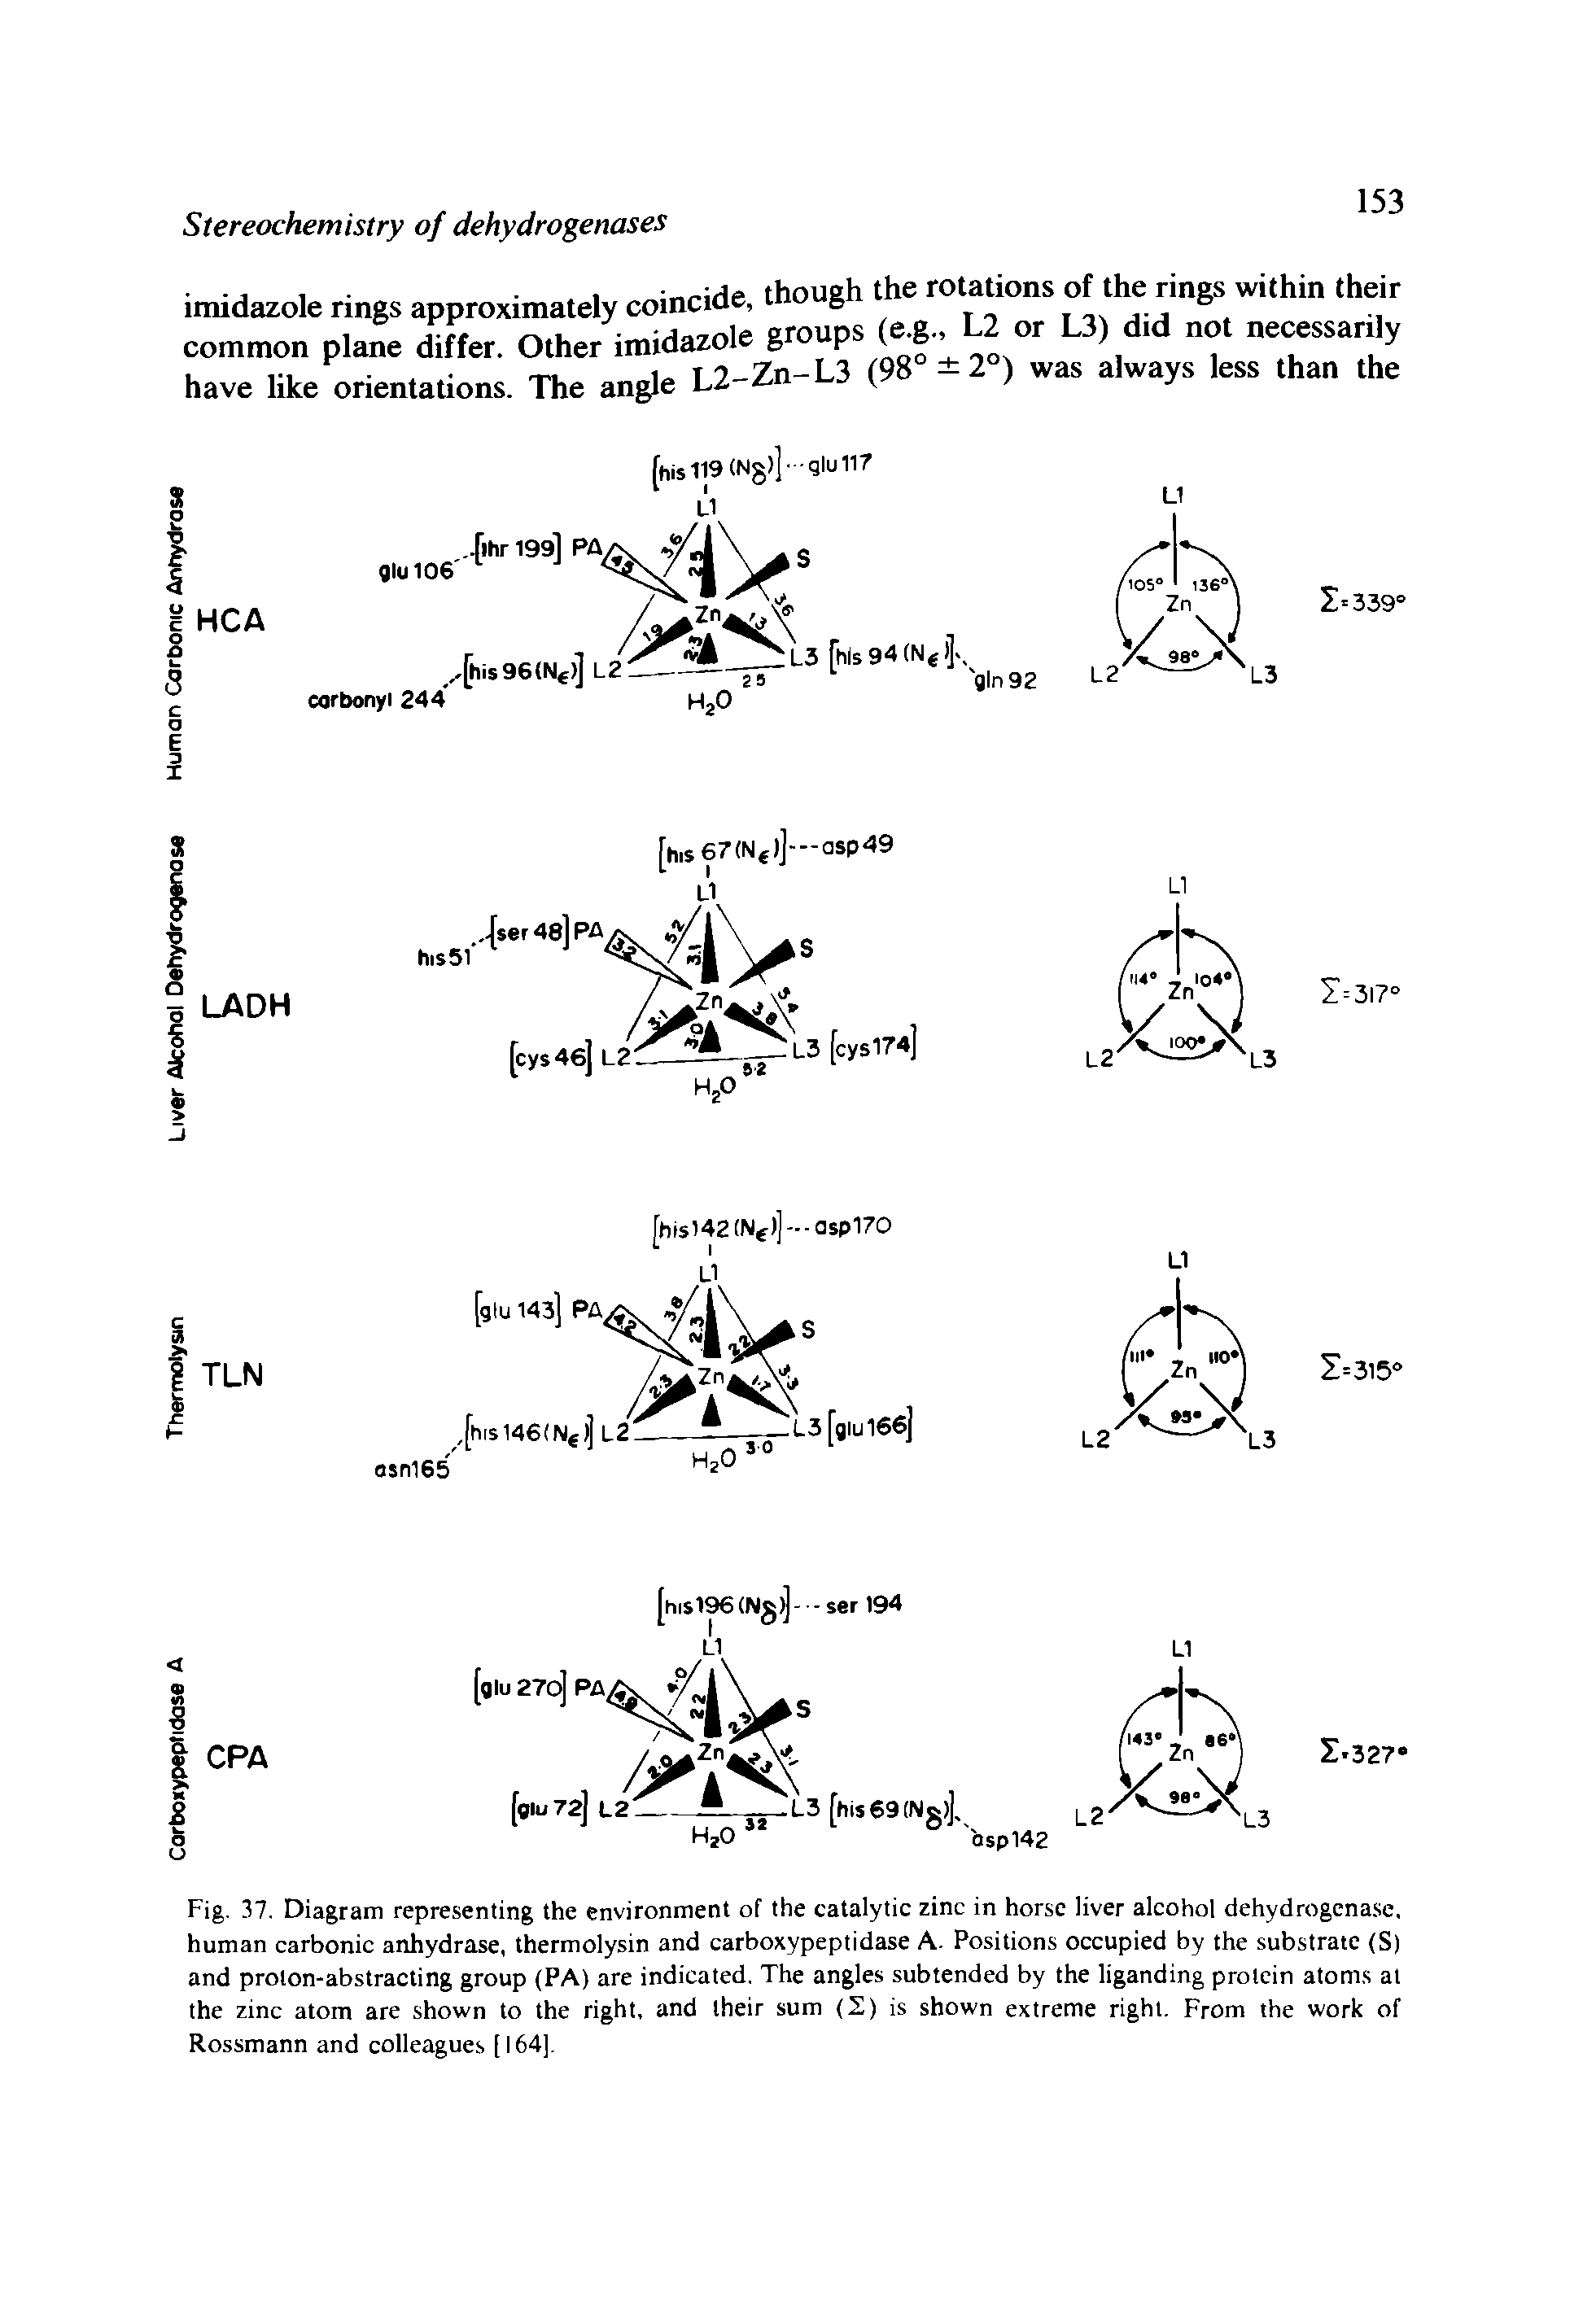 Fig. 37. Diagram representing the environment of the catalytic zinc in horse liver alcohol dehydrogenase, human carbonic anhydrase, thermolysin and carboxypeptidase A. Positions occupied by the substrate (S) and proton-abstracting group (PA) are indicated. The angles subtended by the liganding protein atoms at the zinc atom are shown to the right, and their sum (2) is shown extreme right. From the work of Rossmann and colleagues [ 164].